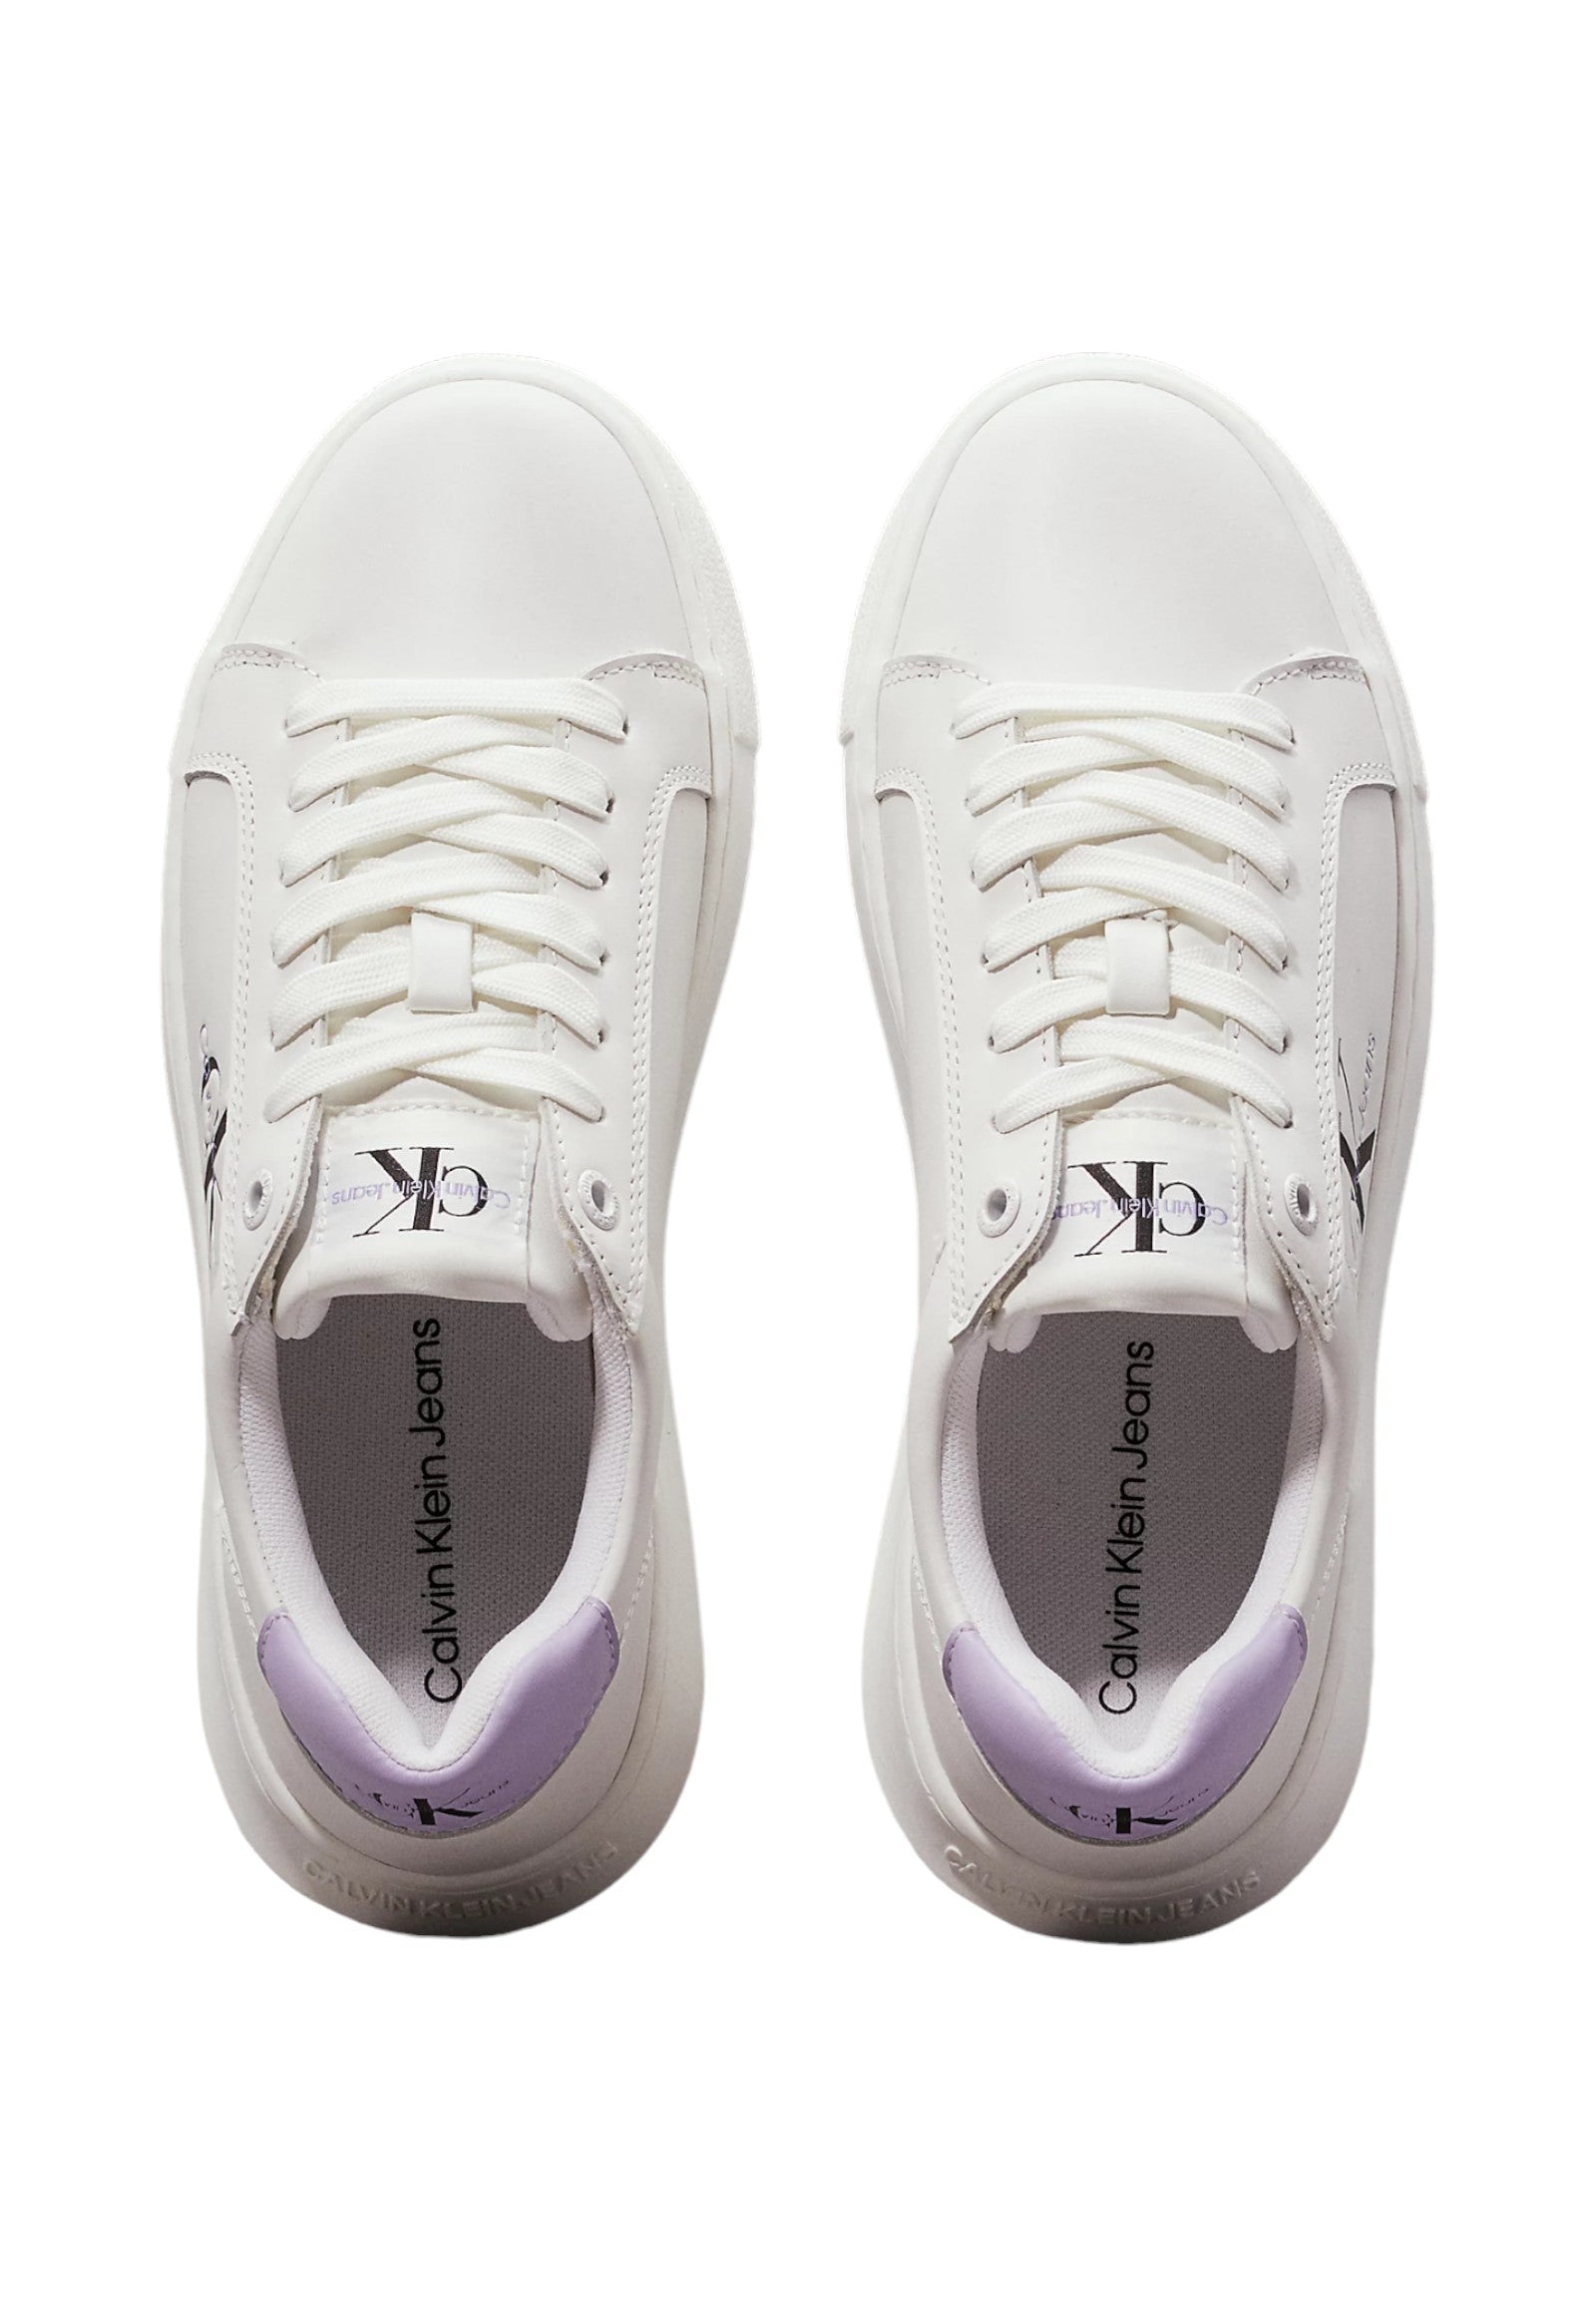 Sneakers Yw0yw00823 Bright WhitE-Pastel Lilac